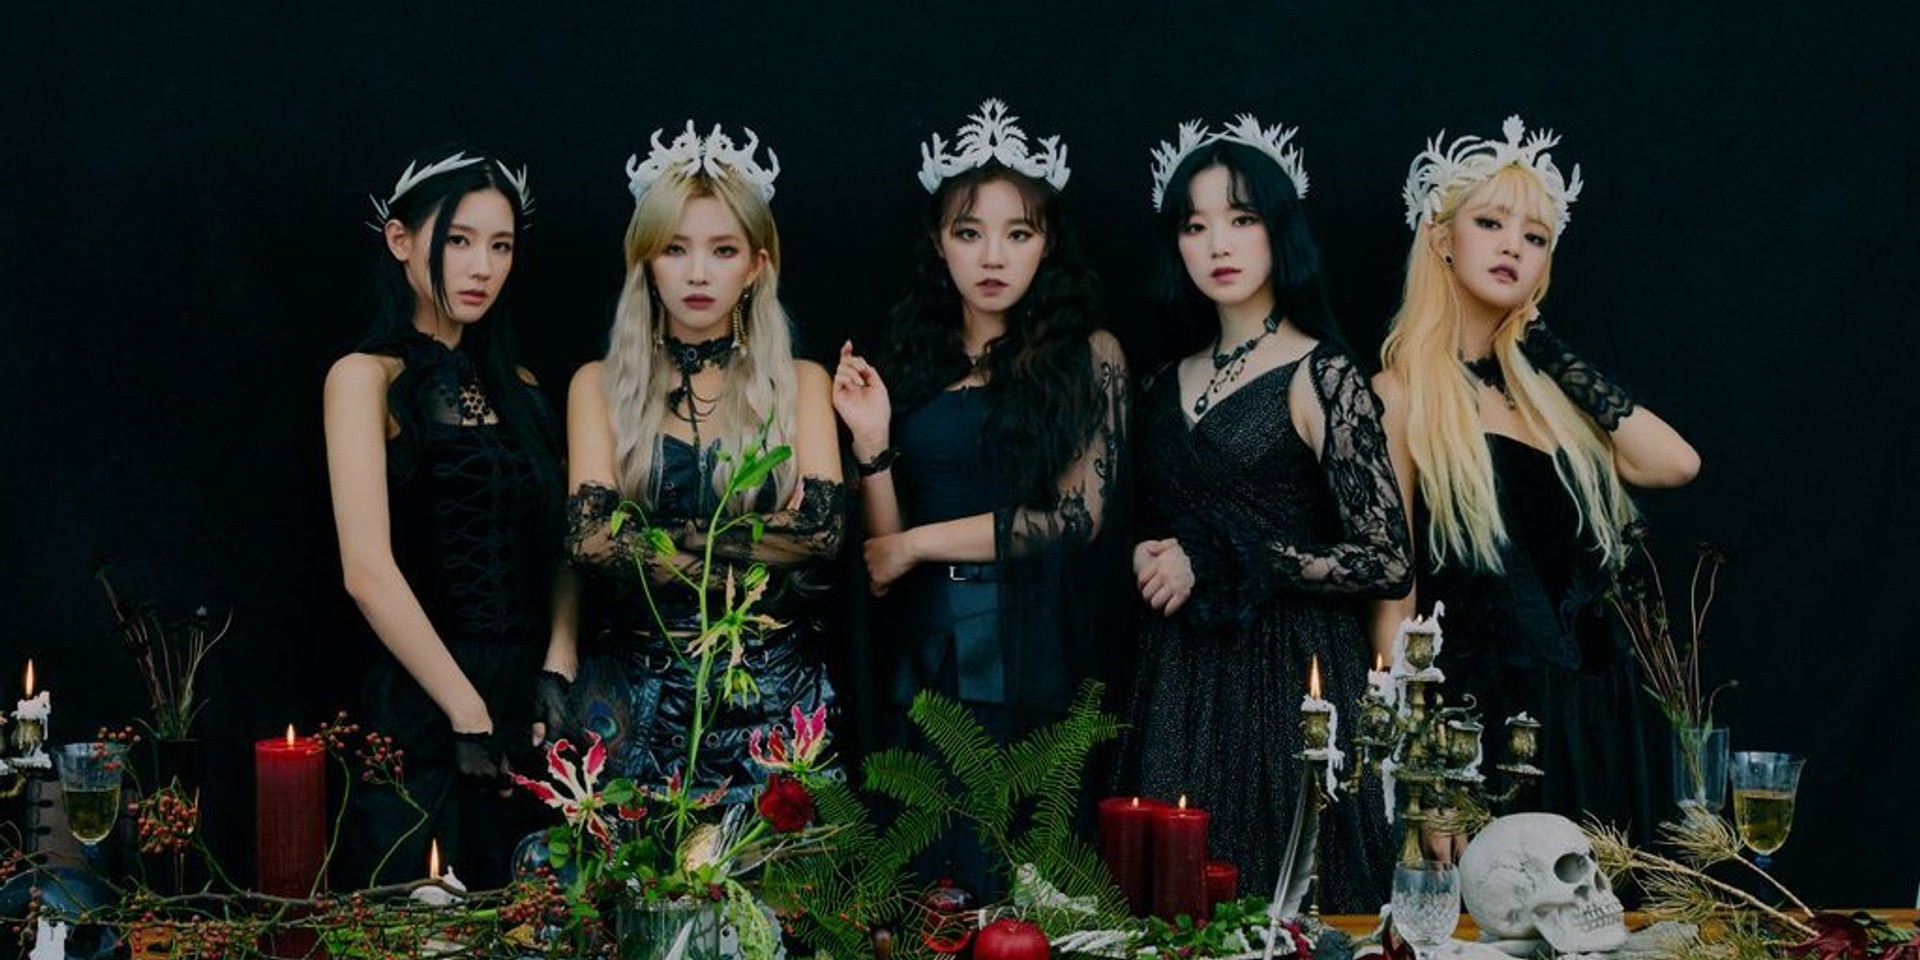 (G)I-DLE unveils prologue film 'THE WITCH QUEEN' ahead of upcoming single, 'Last Dance' - watch